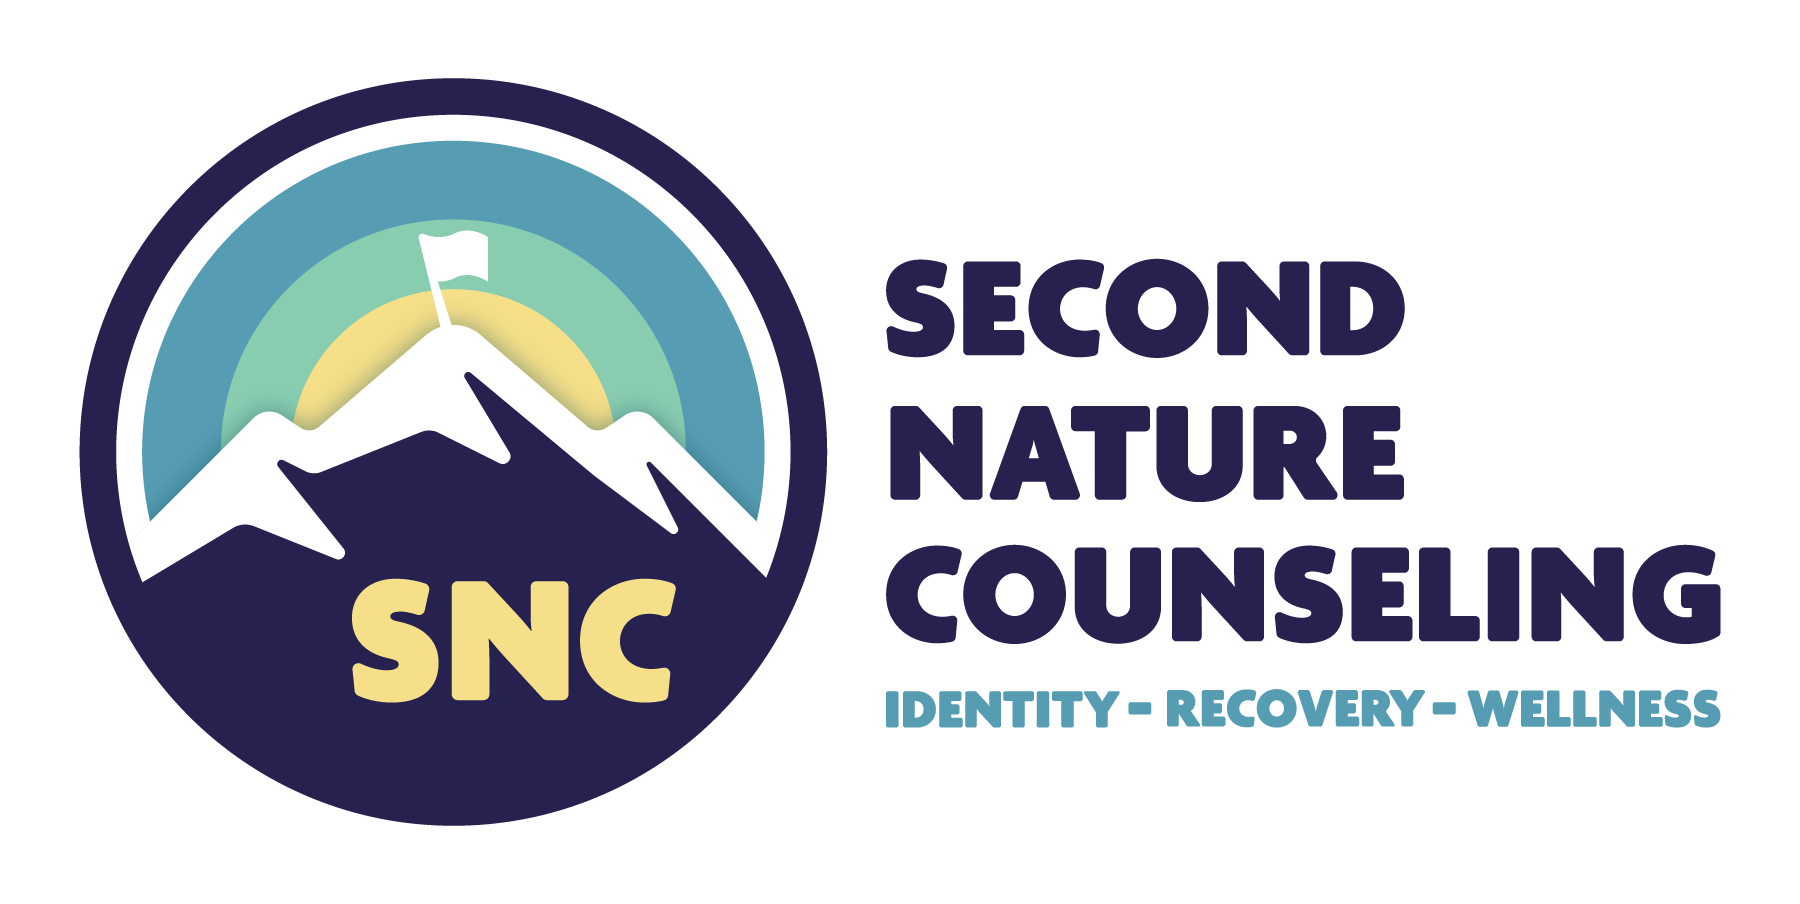 Second Nature Counseling Officially Certified as LGBT Business Enterprise (LGBTBE®) by National LGBT Chamber of Commerce